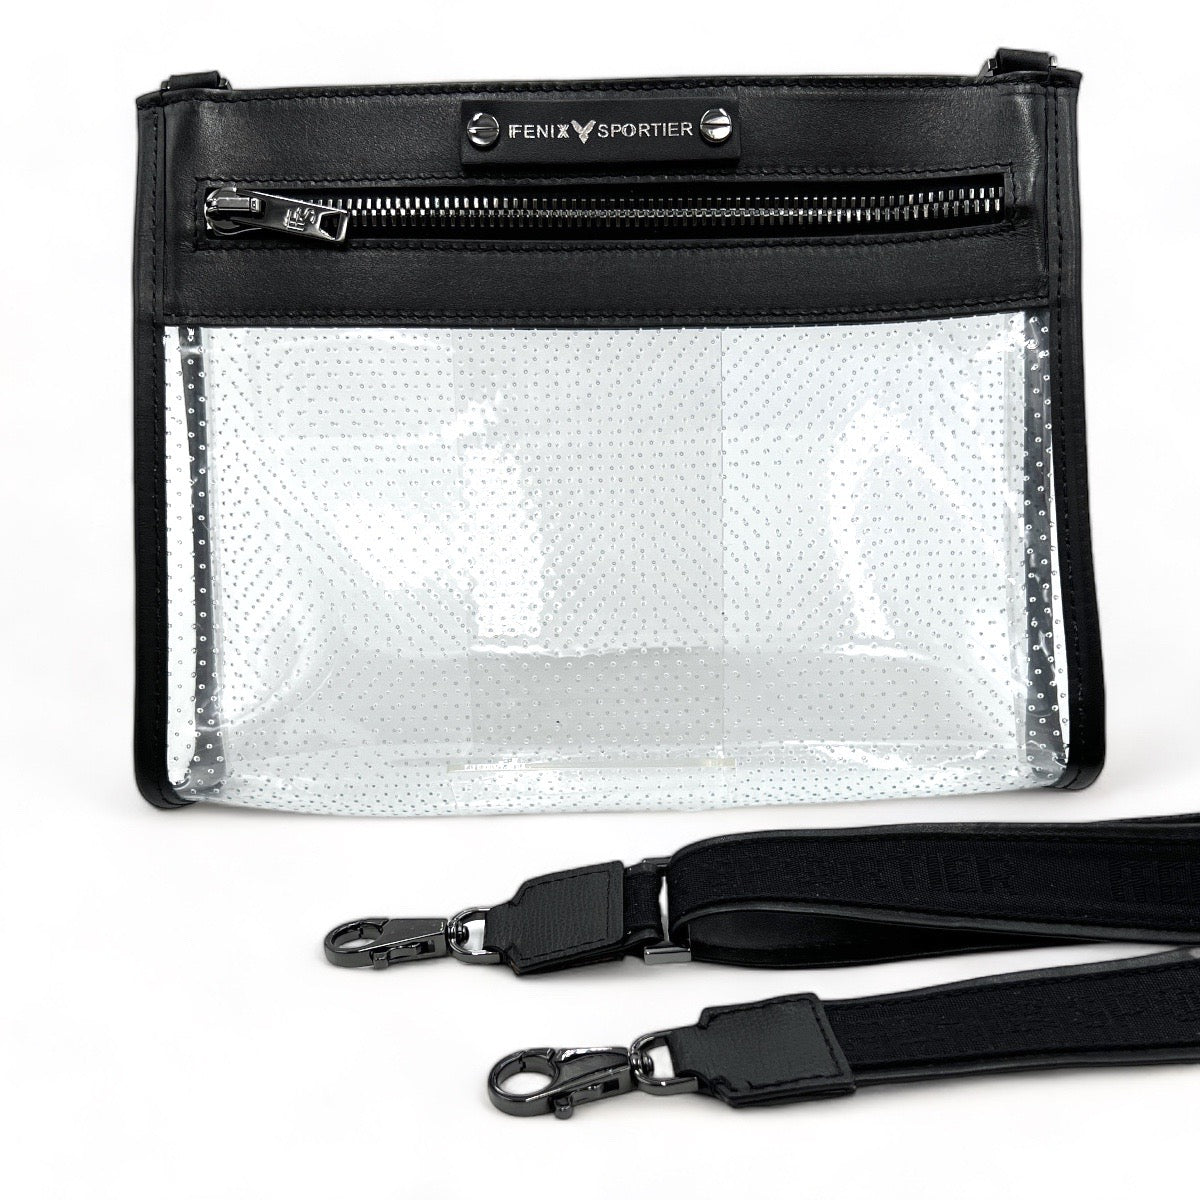 Front Row Bag - Black Leather / Gunmetal hardware / Clear PVC